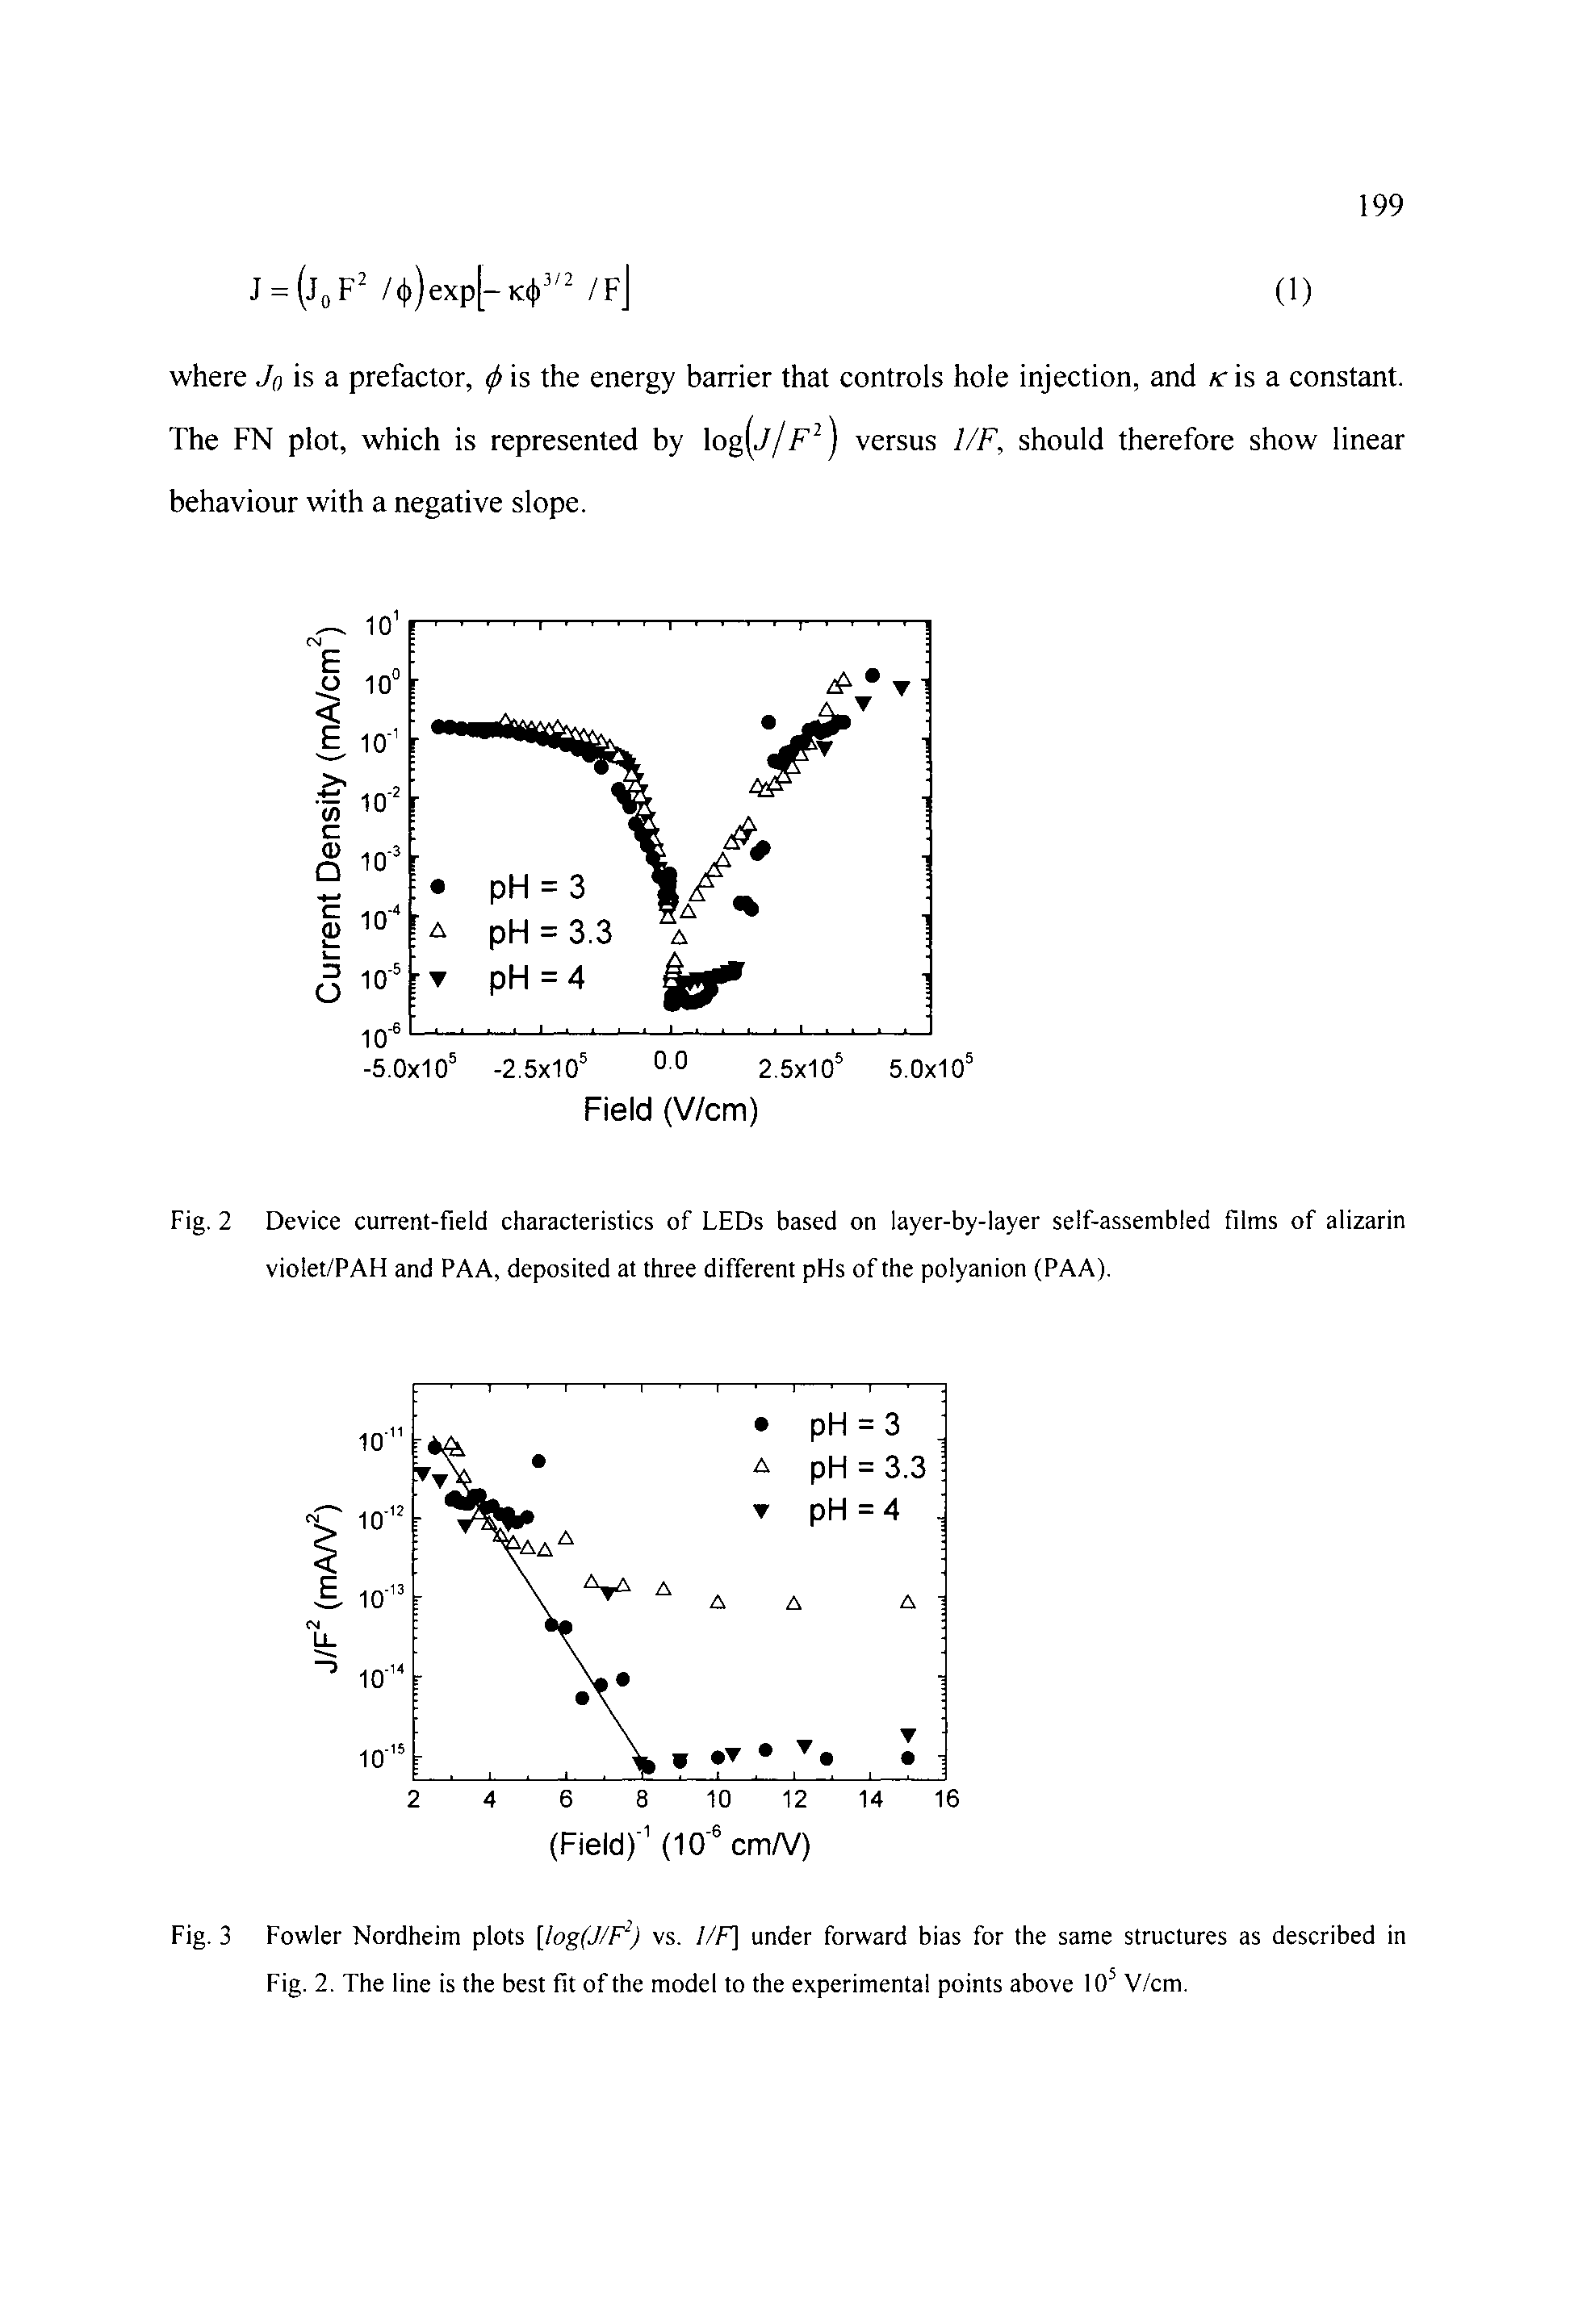 Fig. 3 Fowler Nordheim plots [log(J/F ) vs. I/F] under forward bias for the same structures as described in Fig. 2. The line is the best fit of the model to the experimental points above 10 V/cm.